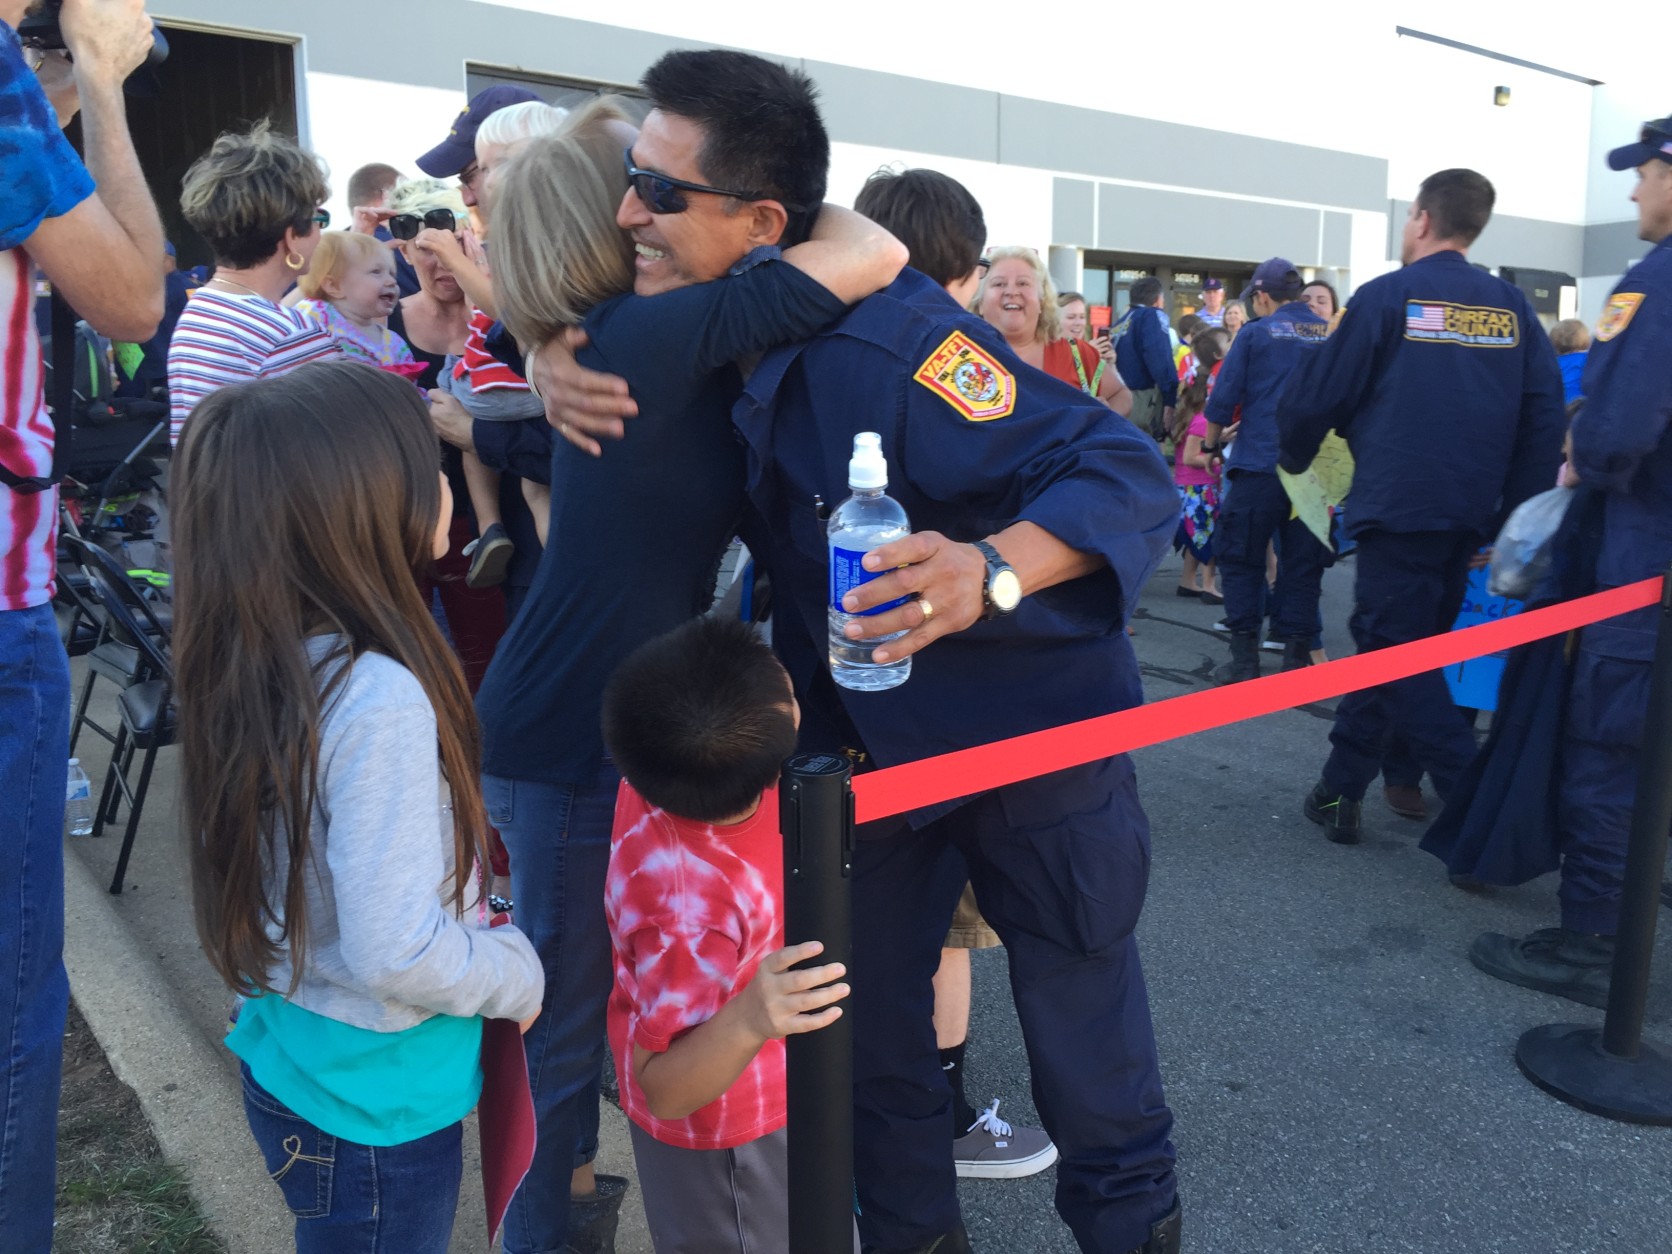 The Fairfax County rescue crew was welcomed home Monday afternoon. (WTOP/Andrew Mollenbeck)